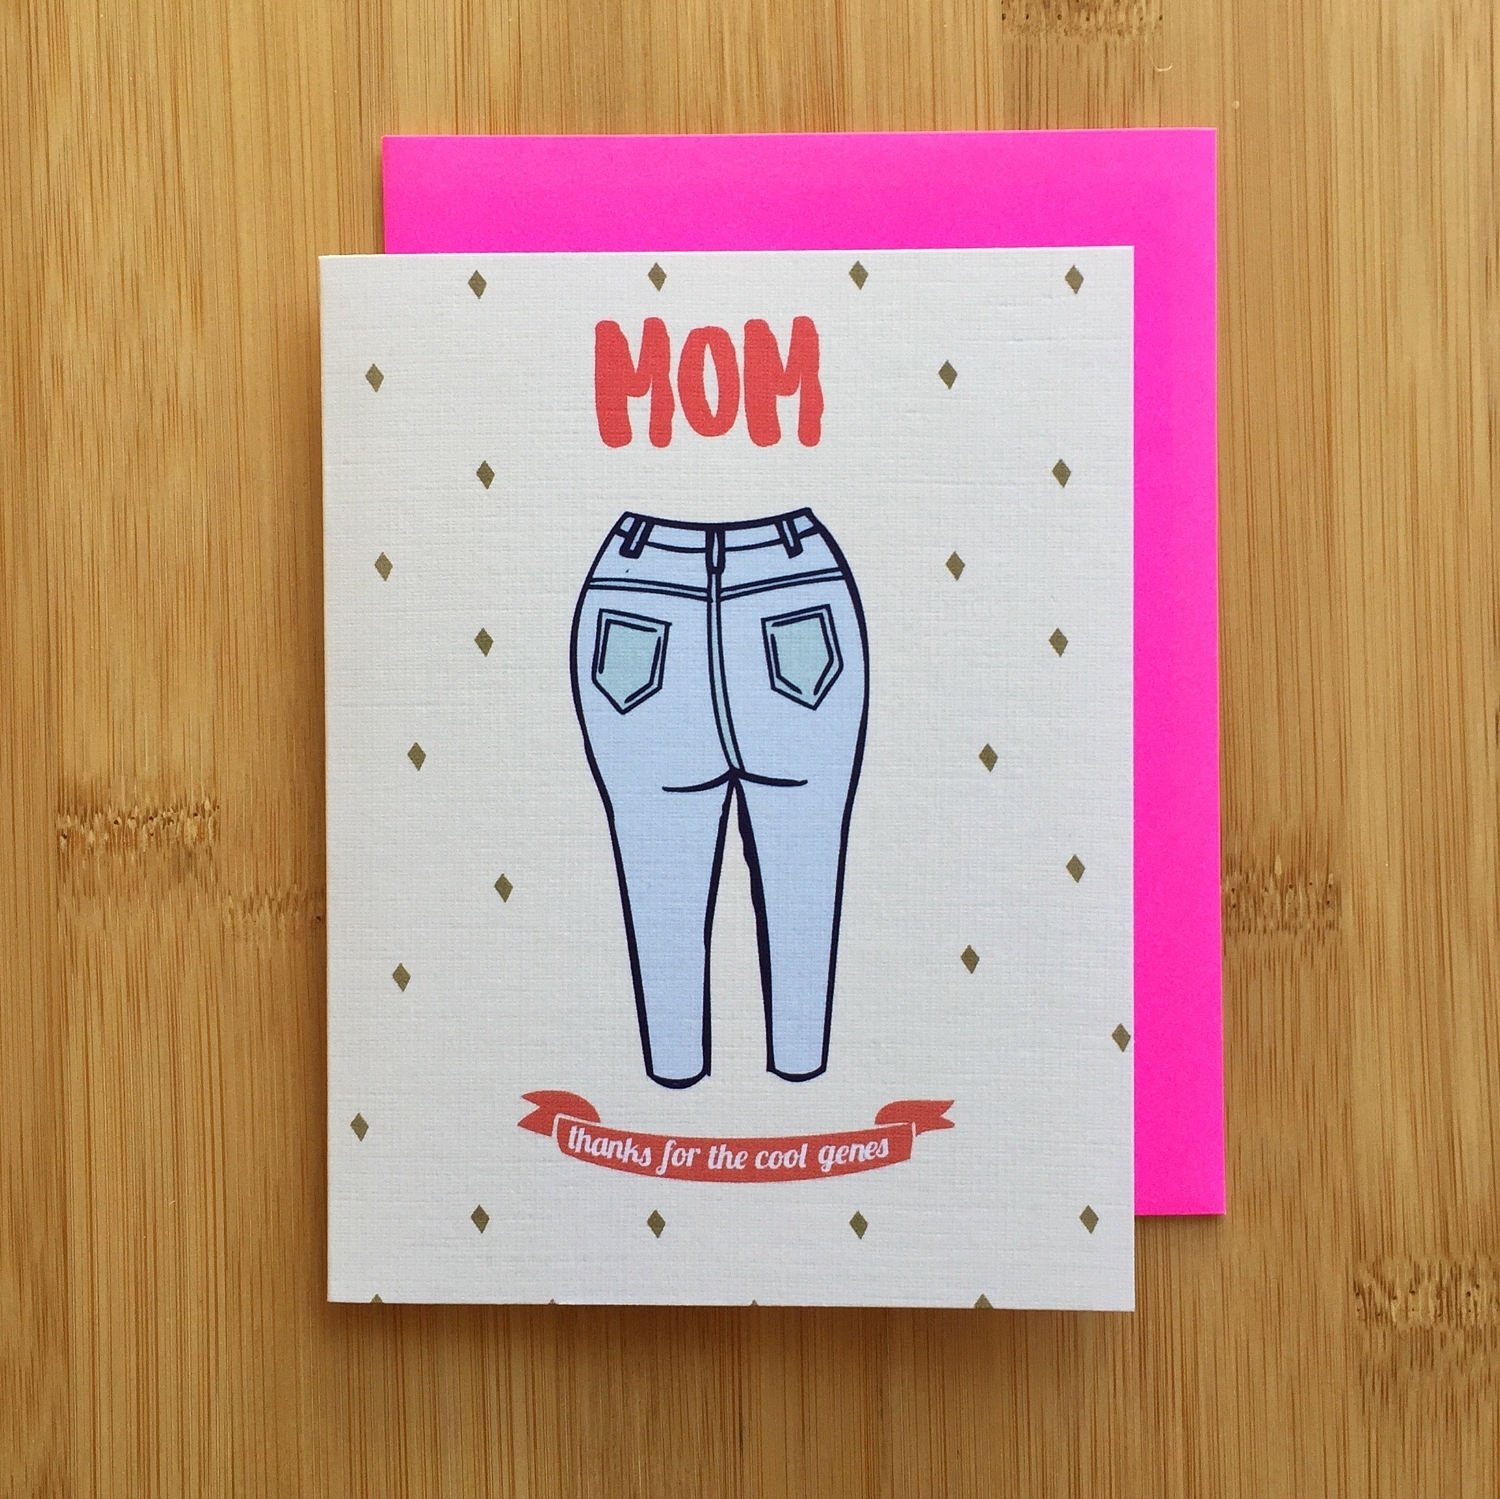 10 Trendy Cool Ideas For Birthday Cards funny birthday cards for mom design with mom jeans illustration and 2022